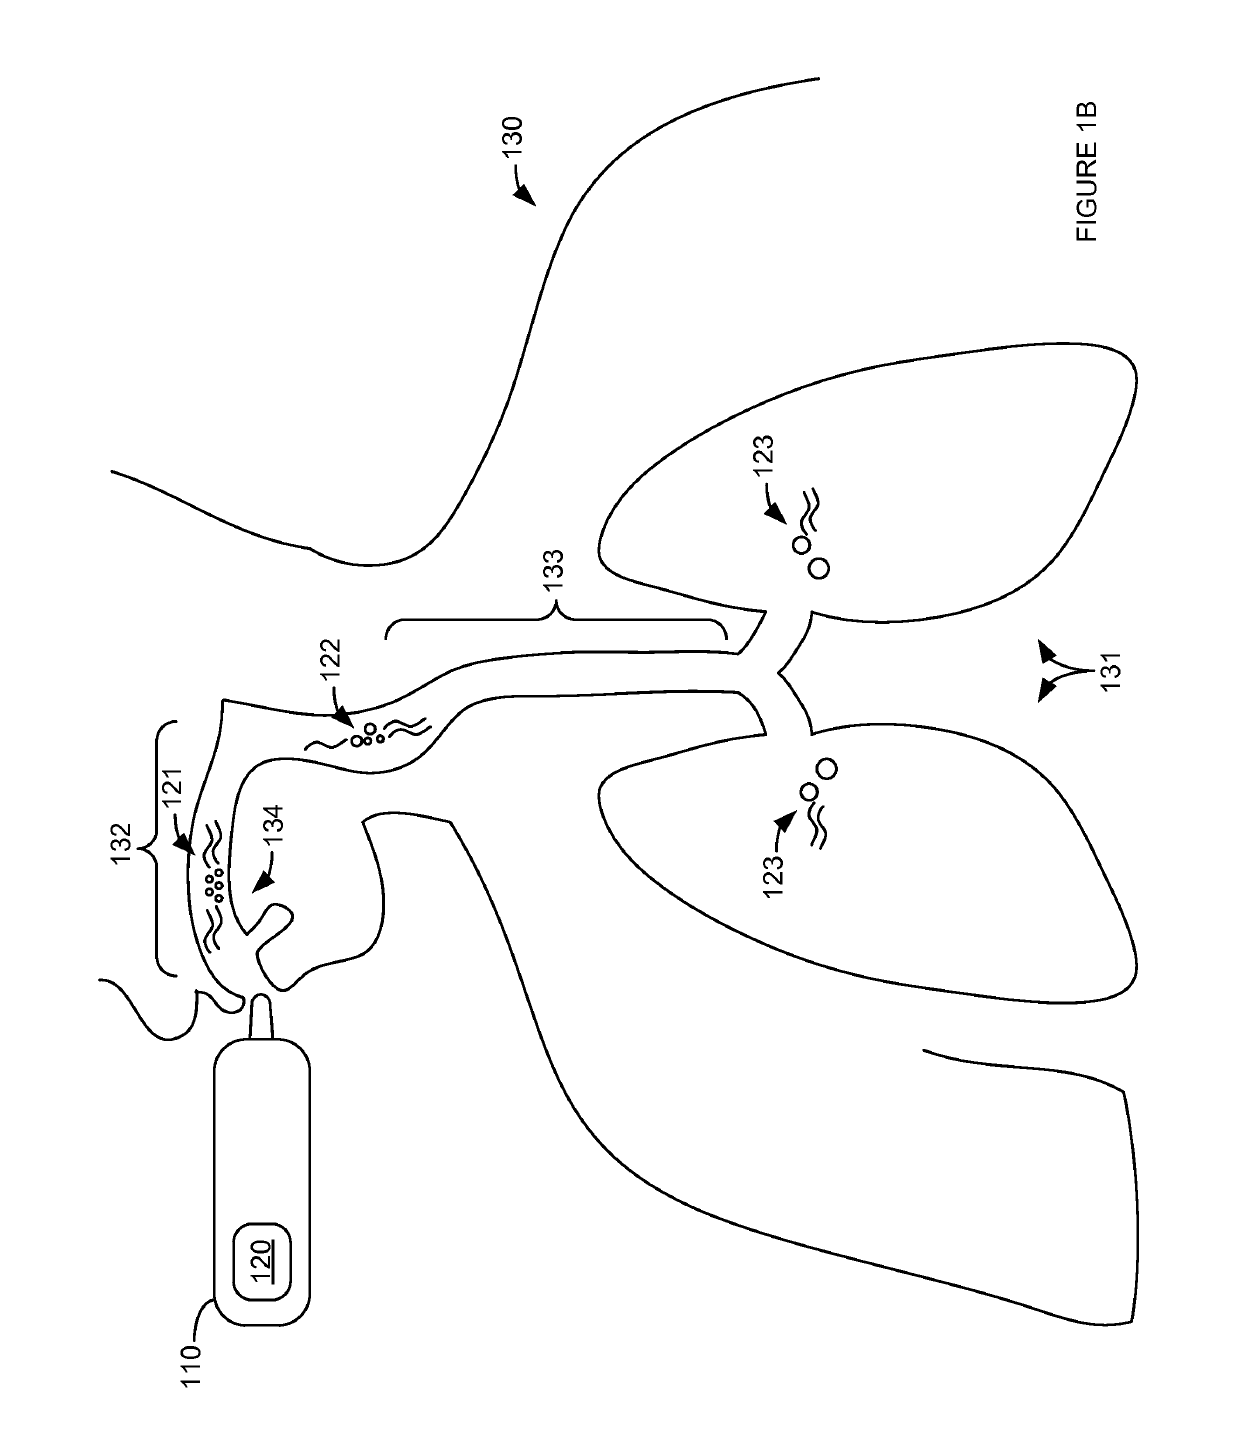 Thermal modulation of an inhalable medicament